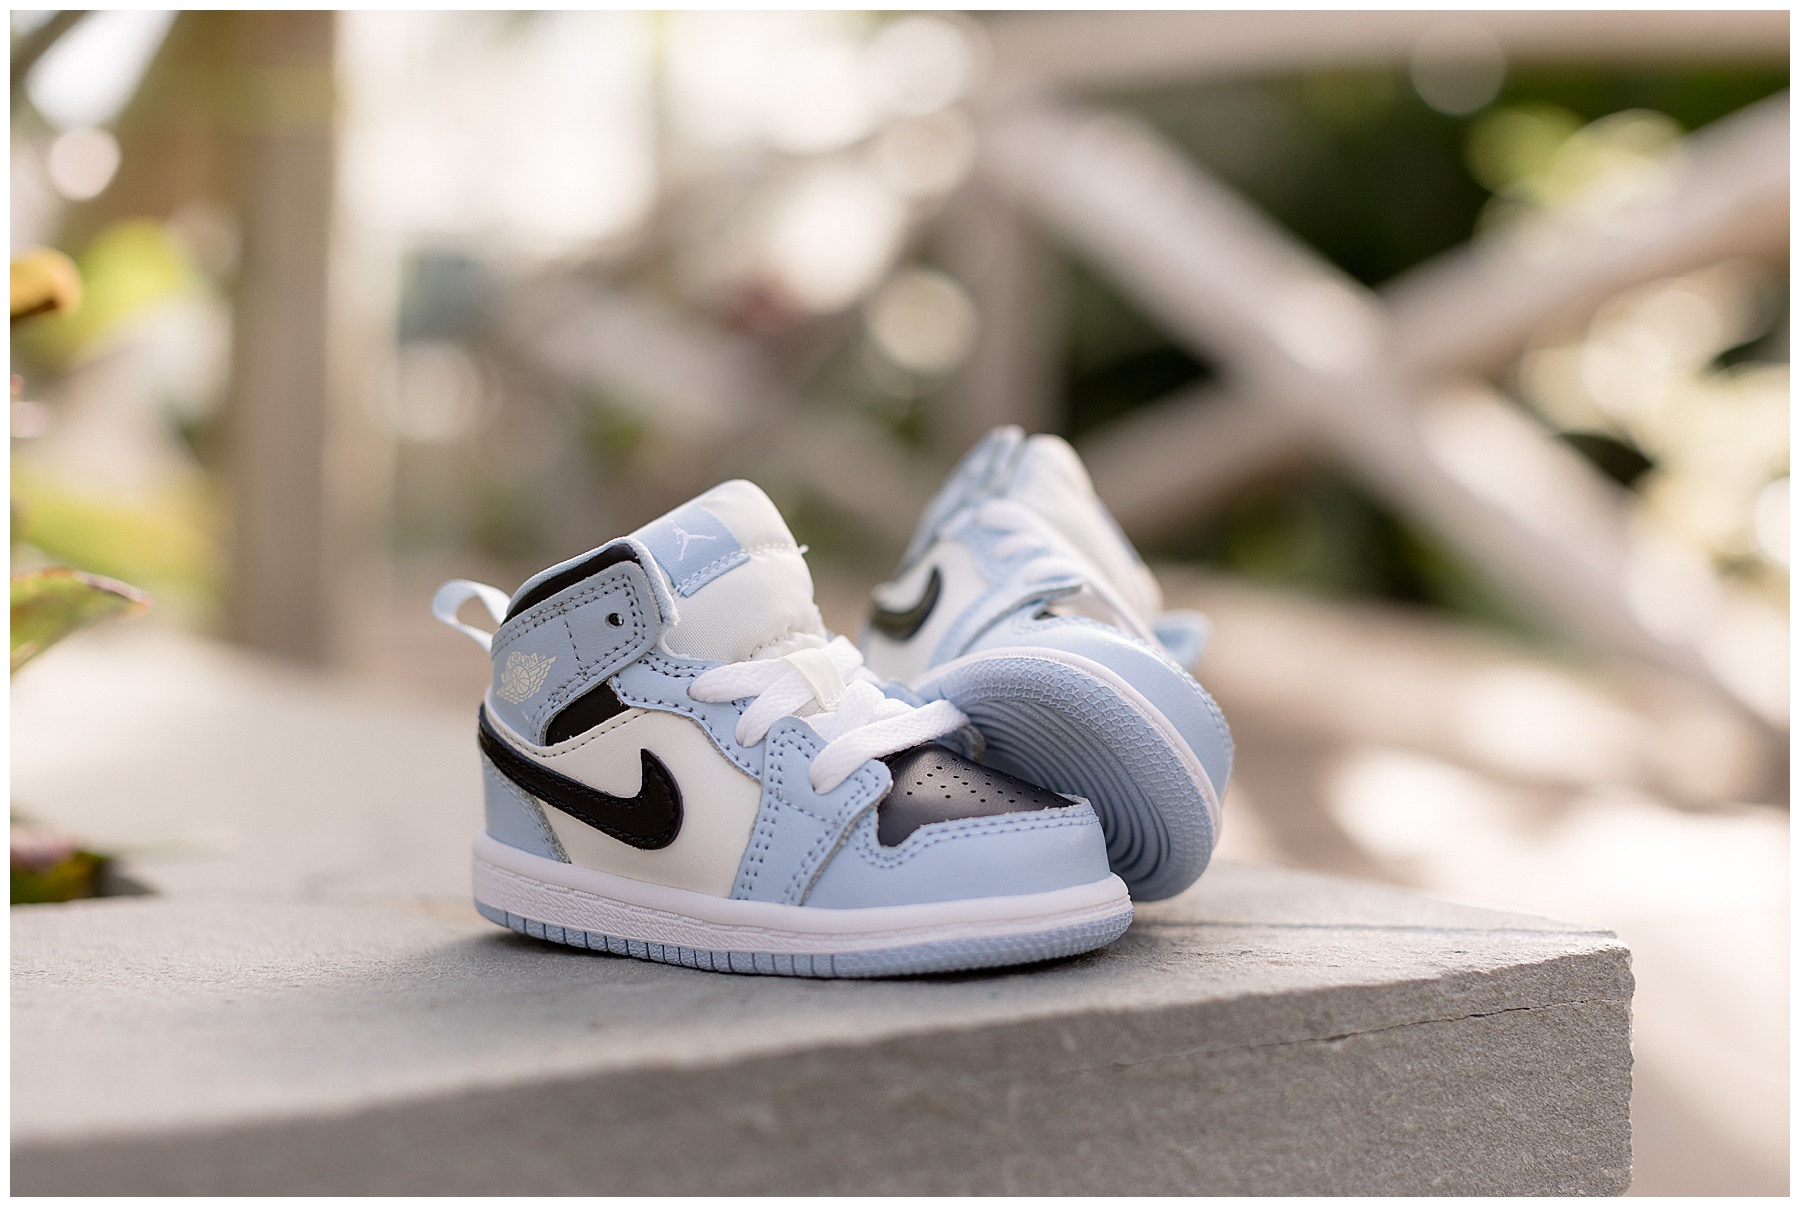 blue baby sneakers as prop in greenhouse pregnancy announcement